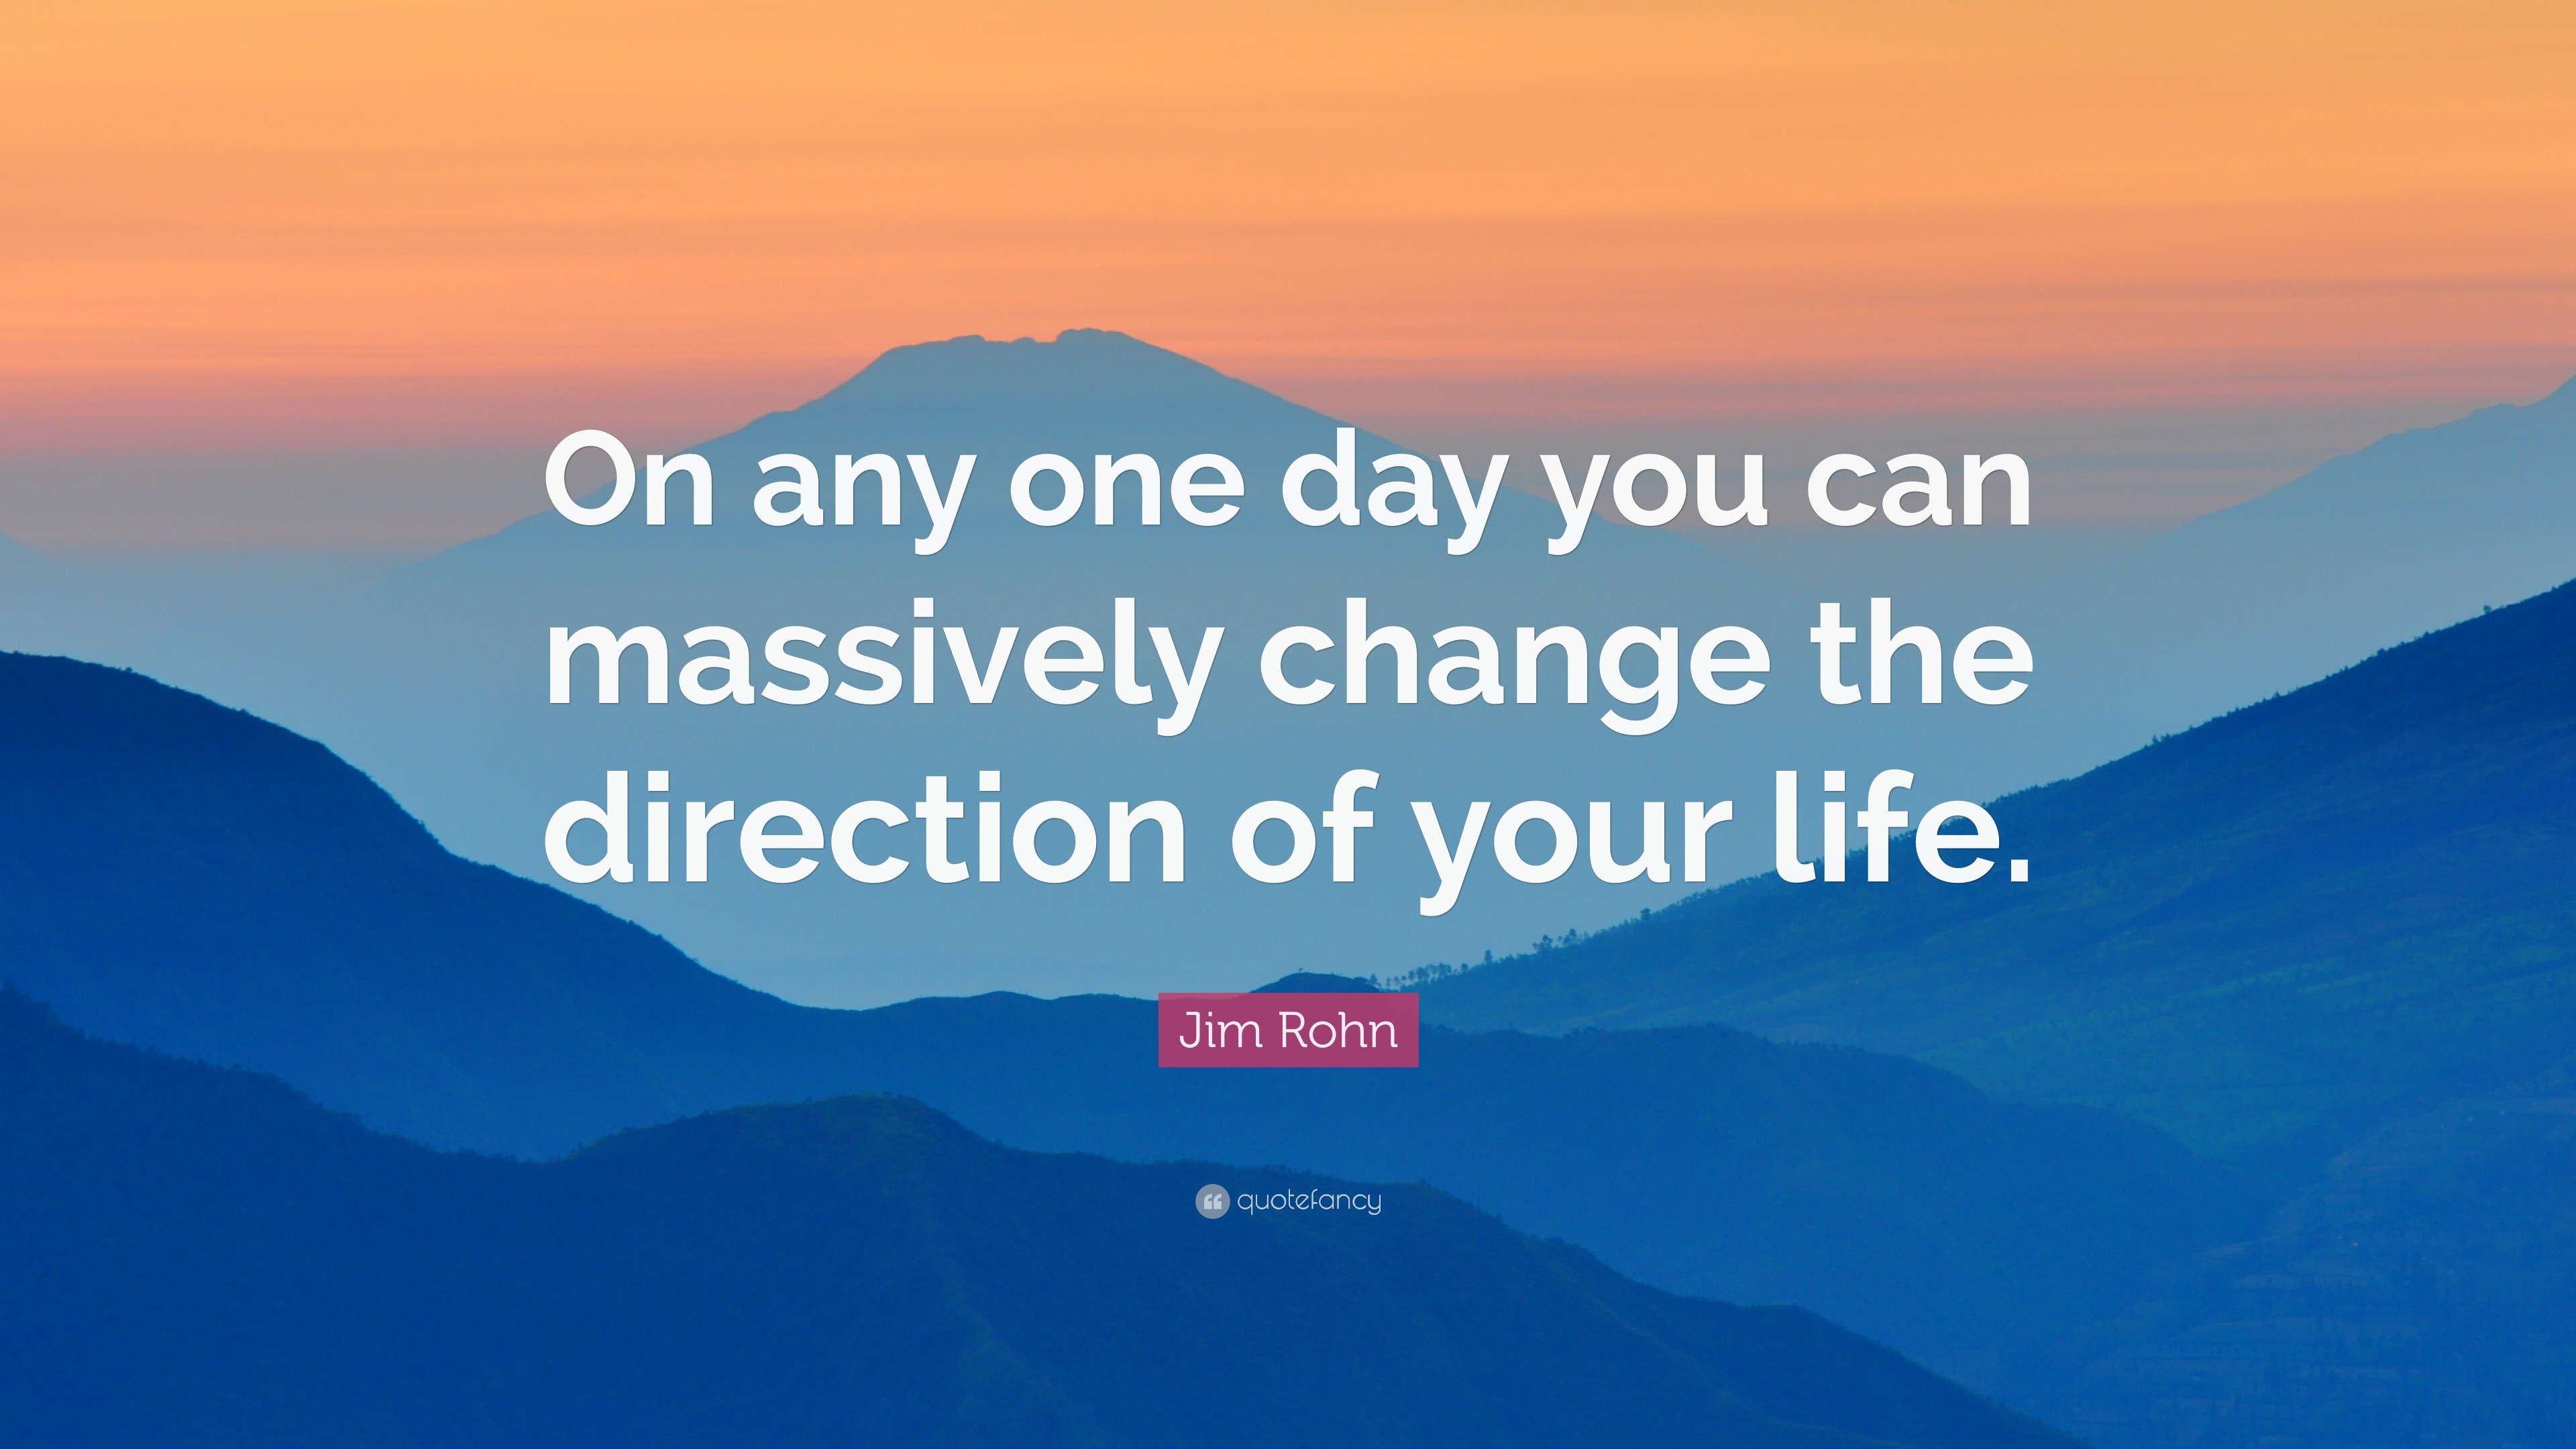 Jim Rohn Quote “ any one day you can massively change the direction of